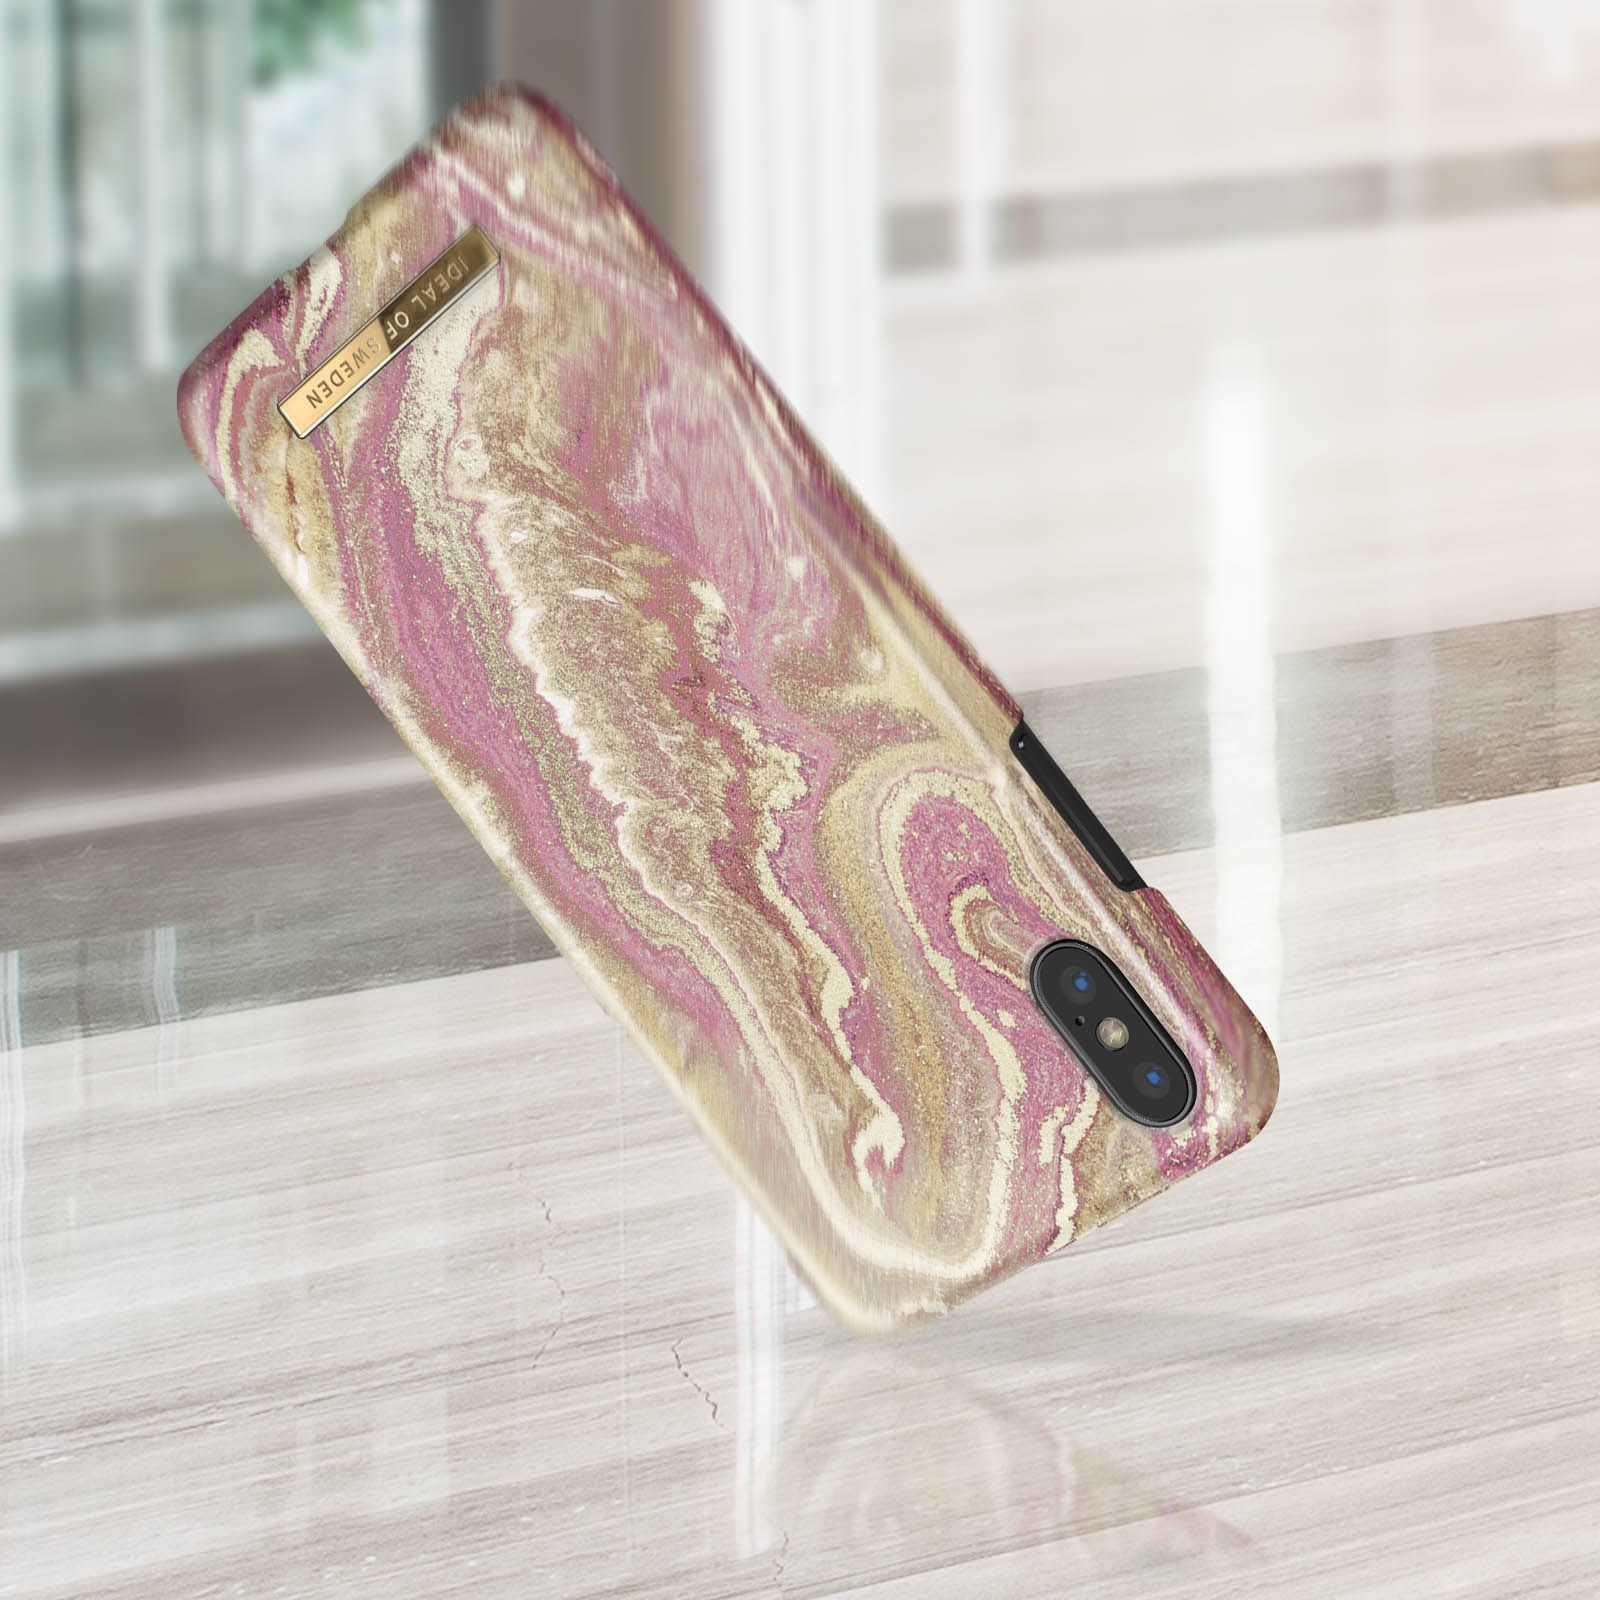 Backcover, Golden IPhone Blush X/XS, IDFCSS19-IXS-120, Marble OF Apple, SWEDEN IDEAL